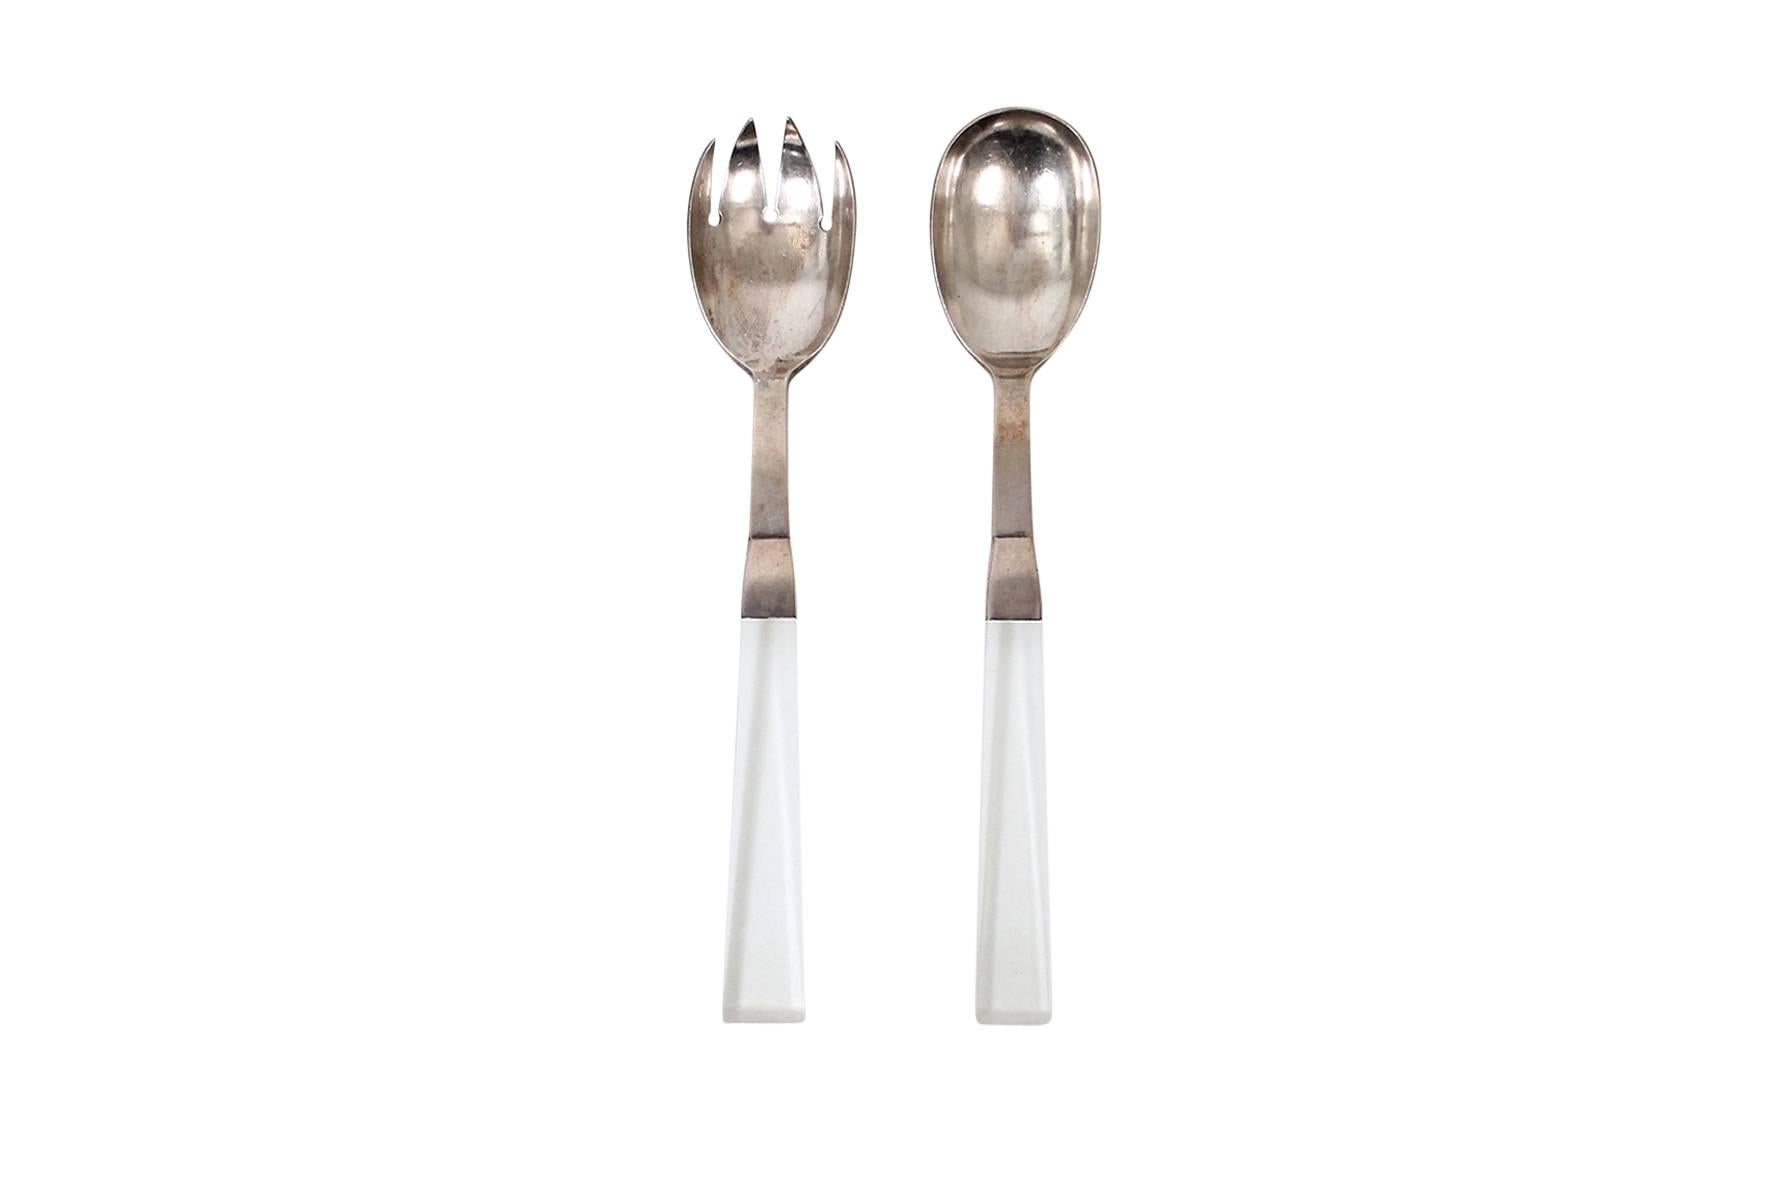 Early Modernist serving pieces in sterling silver with lucite handles by noted California silversmith Porter Blanchard. Each utensil stamped 